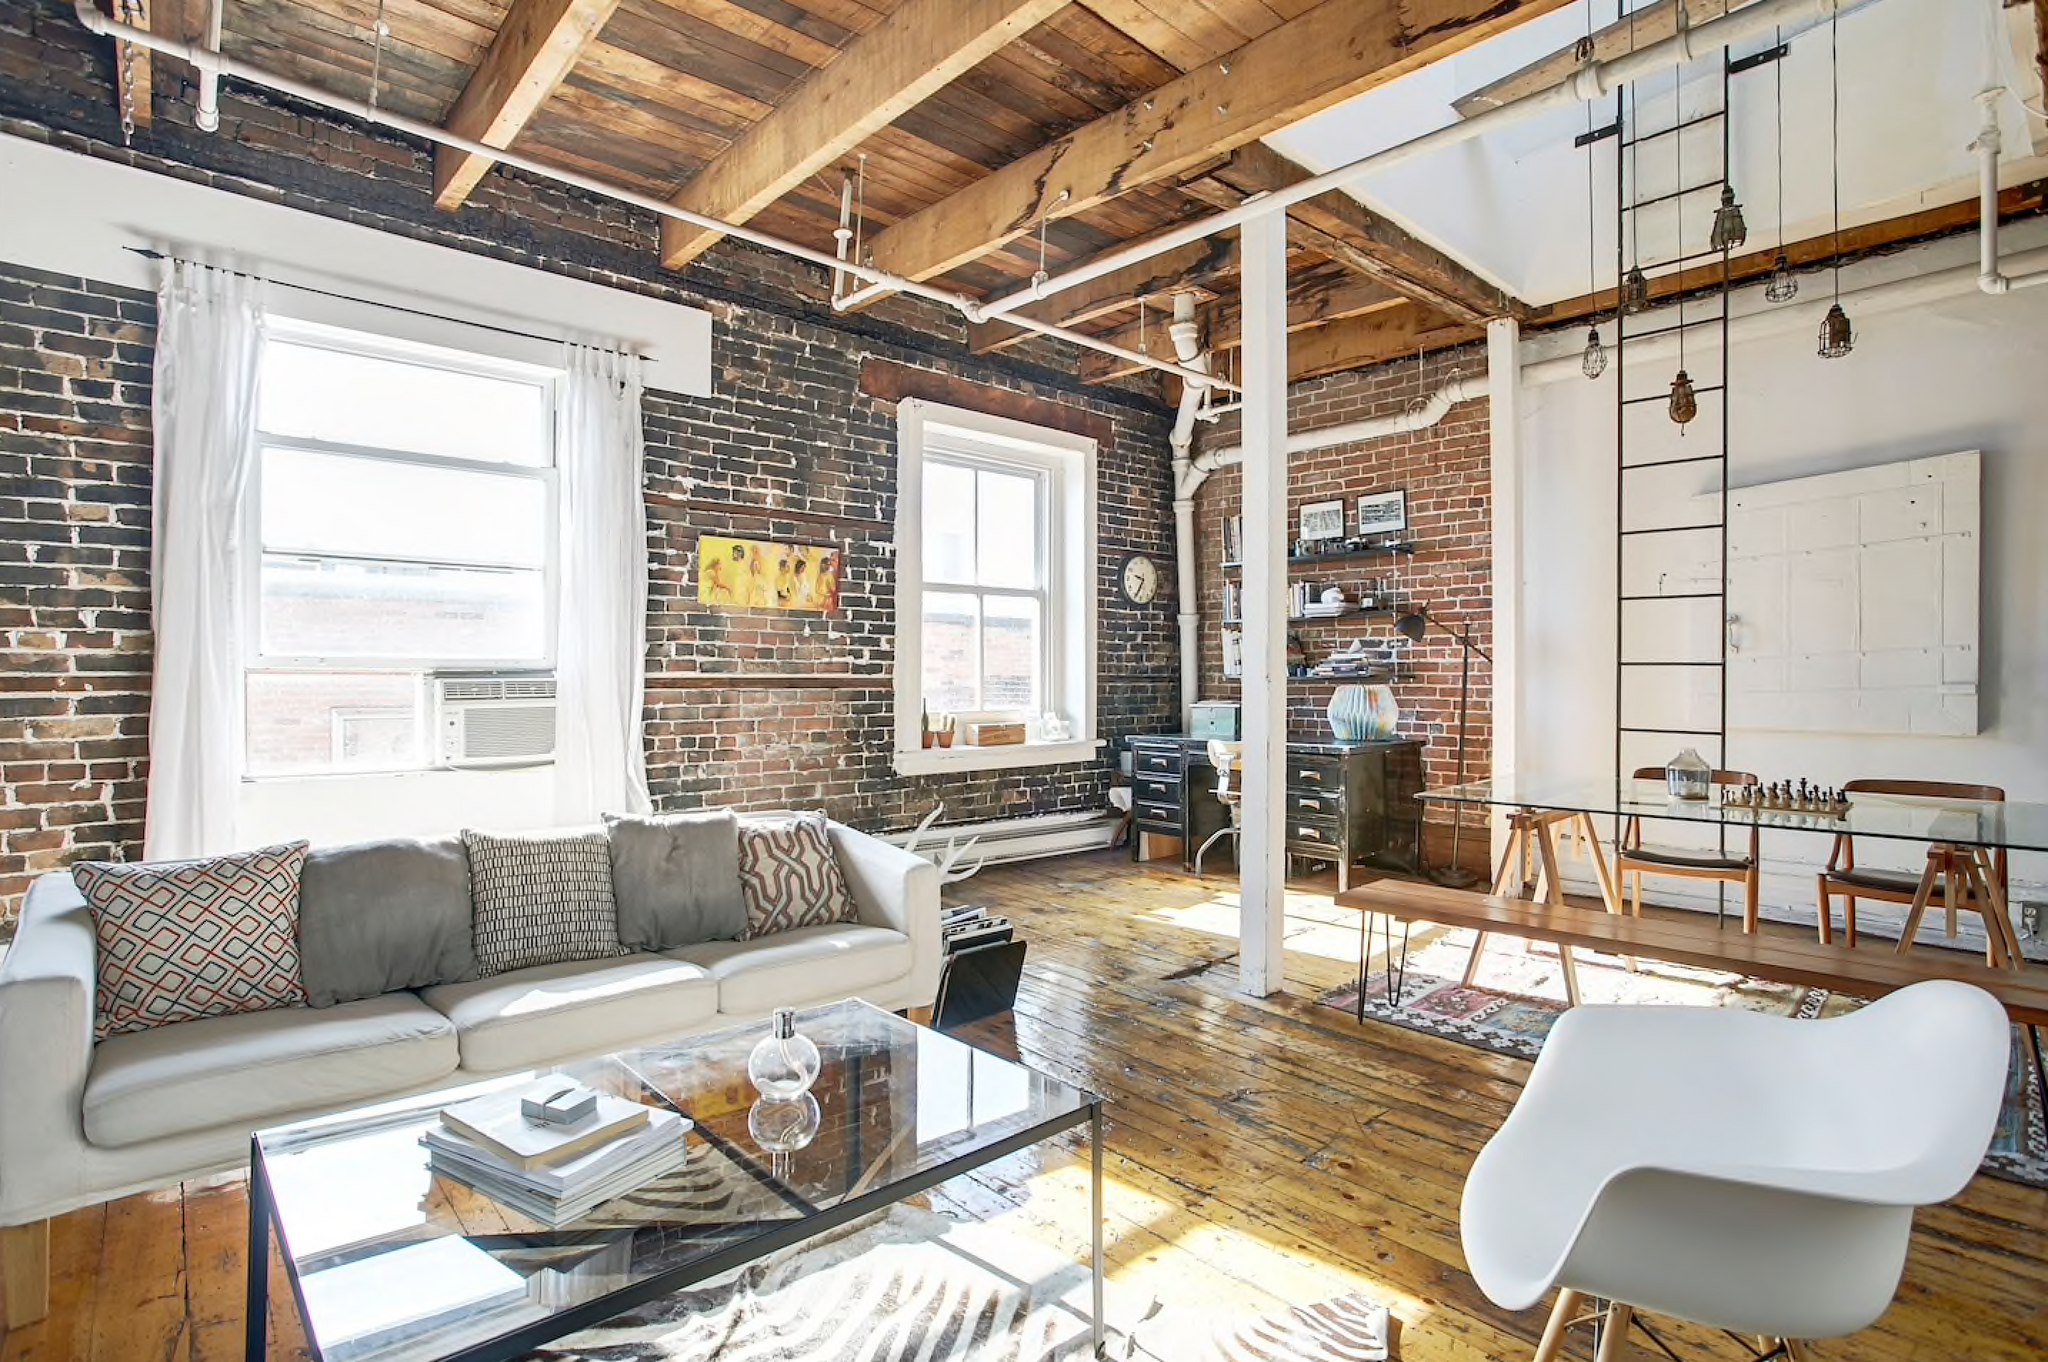 Province of Canada - Old Montreal Loft Airbnb